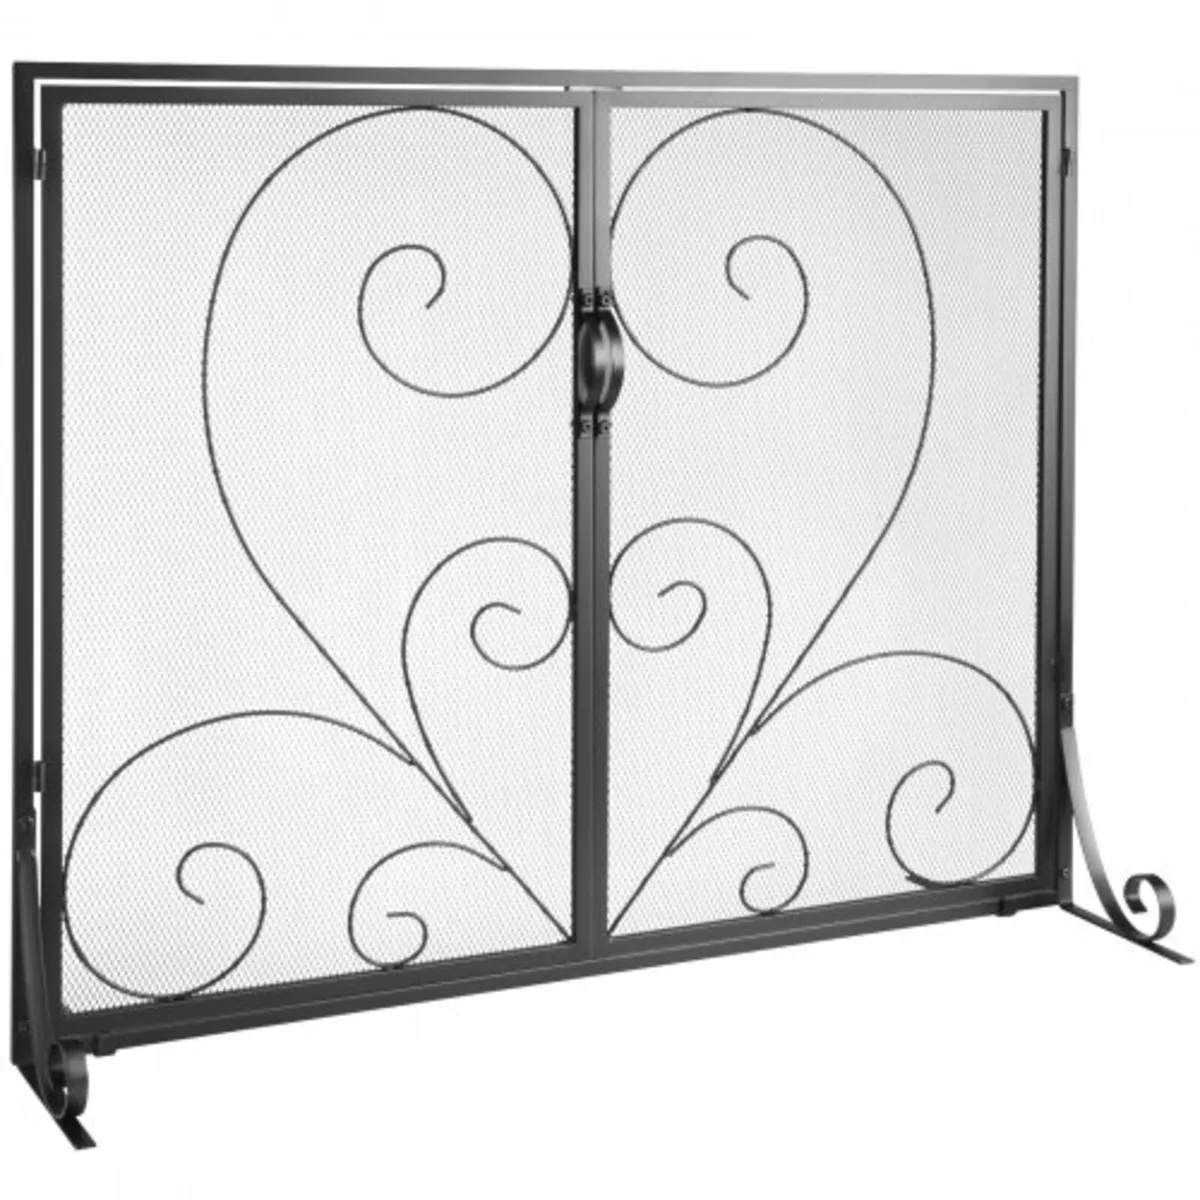 Fireplace Screen 2 Panel with Door, Sturdy Iron Me